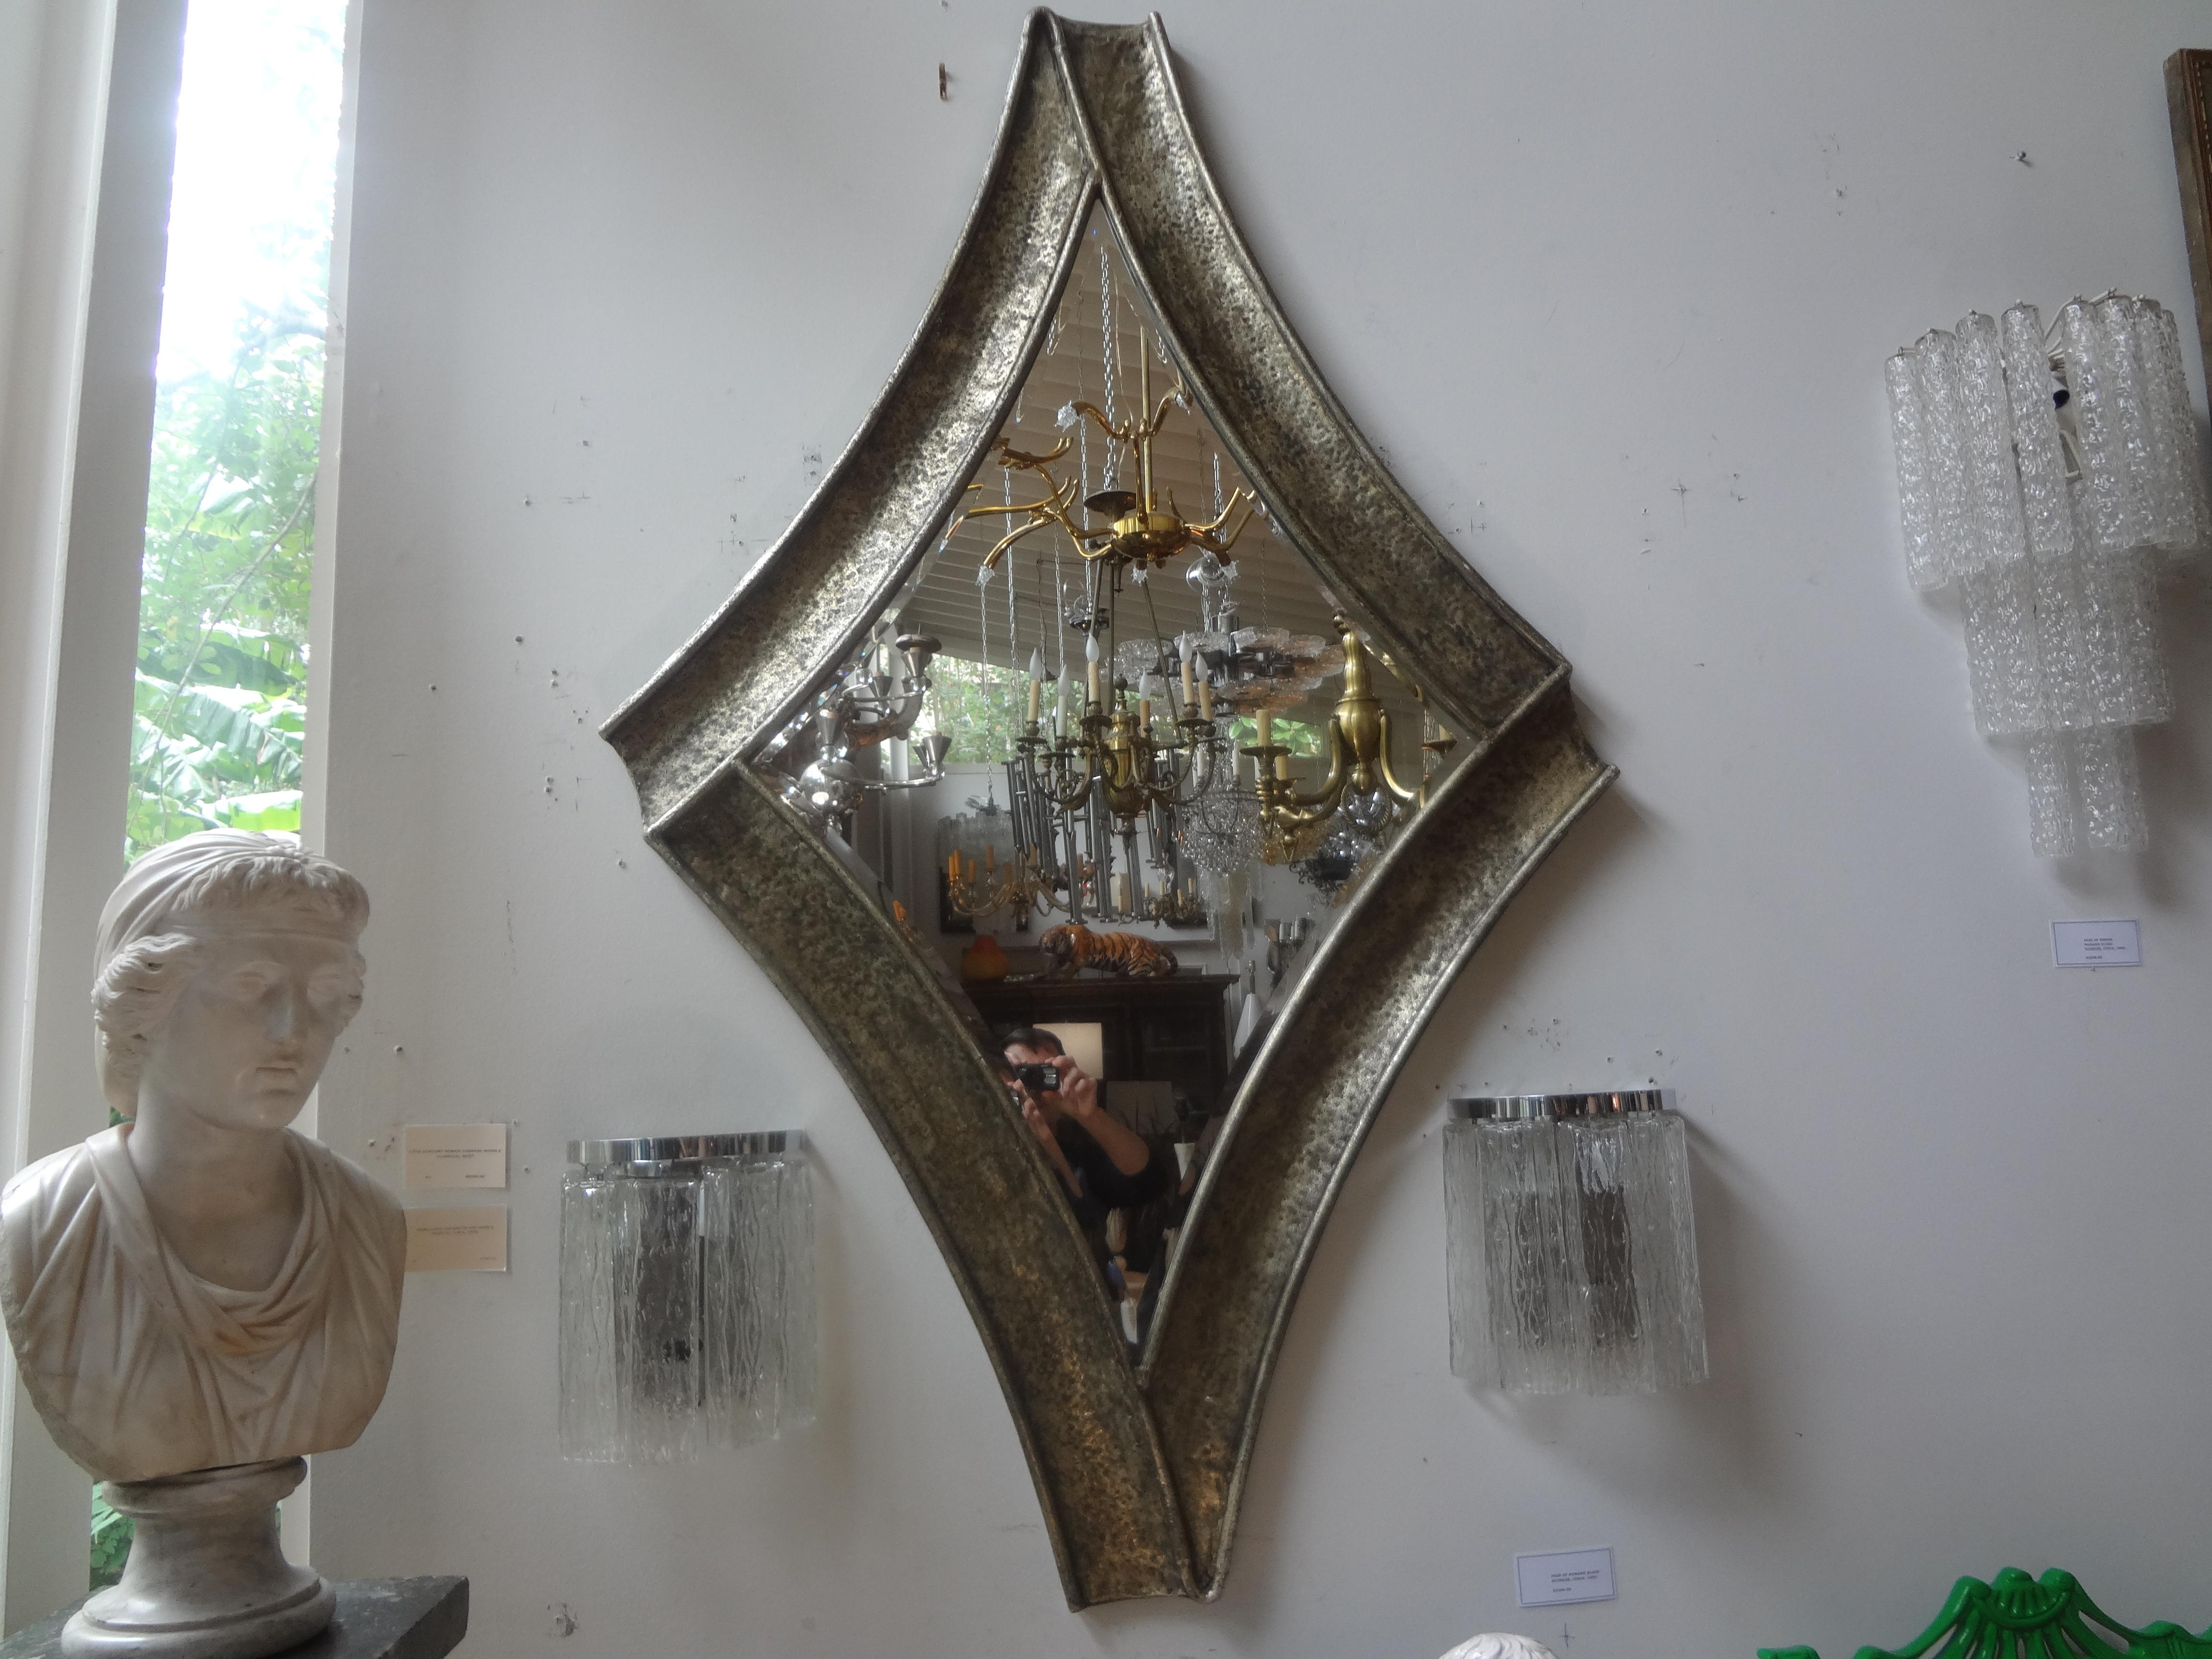 Midcentury Brutalist hammered metal beveled mirror.
Unique large midcentury Brutalist hammered metal beveled mirror. This versatile mirror would work well in a variety of interiors.
Great shape!